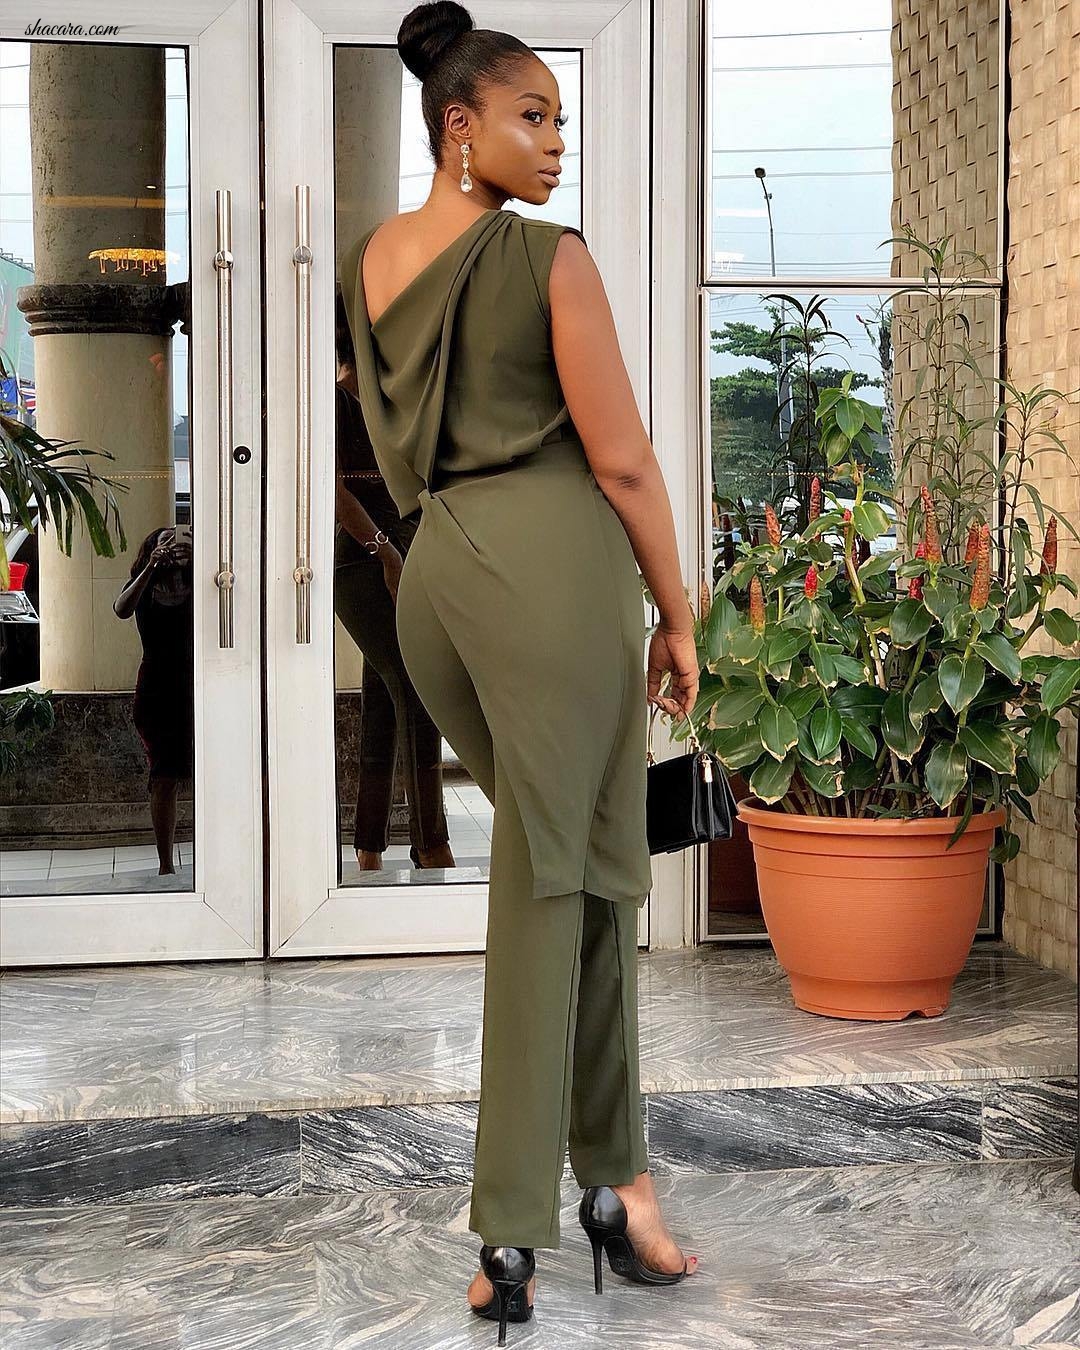 Lilian Afegbai Rocks A Ballerina Bun While Looking Impossibly Chic In Army Green